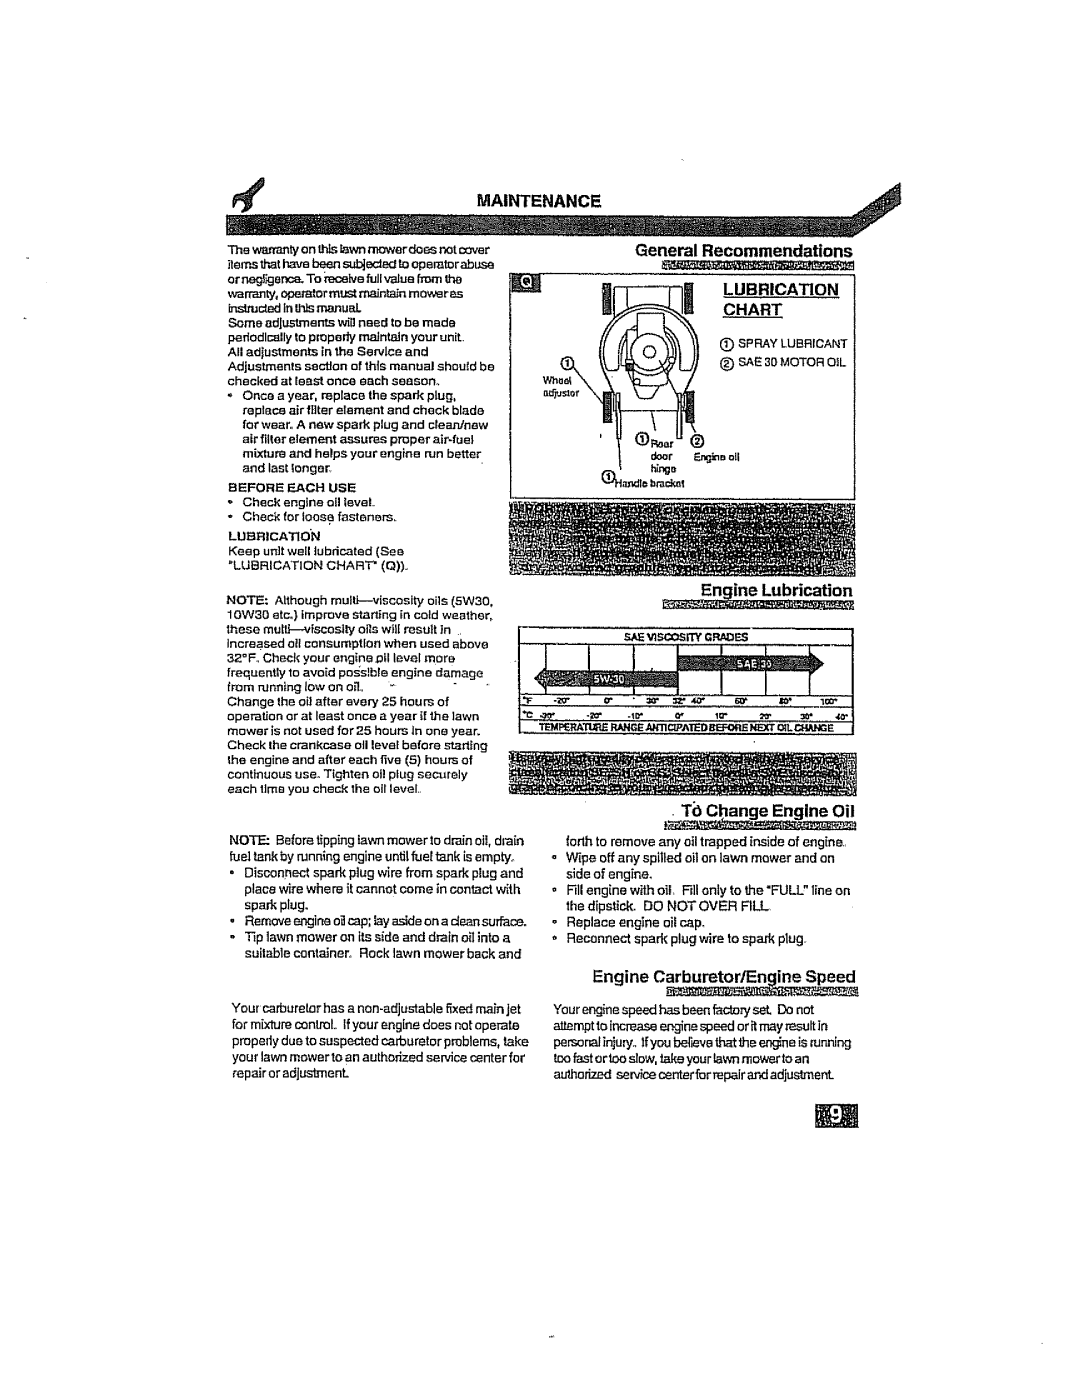 Craftsman 917.38919 owner manual General Recommendations LUBRICATION CHART, • TO Change Engine Oil, Engine C, Maintenance 